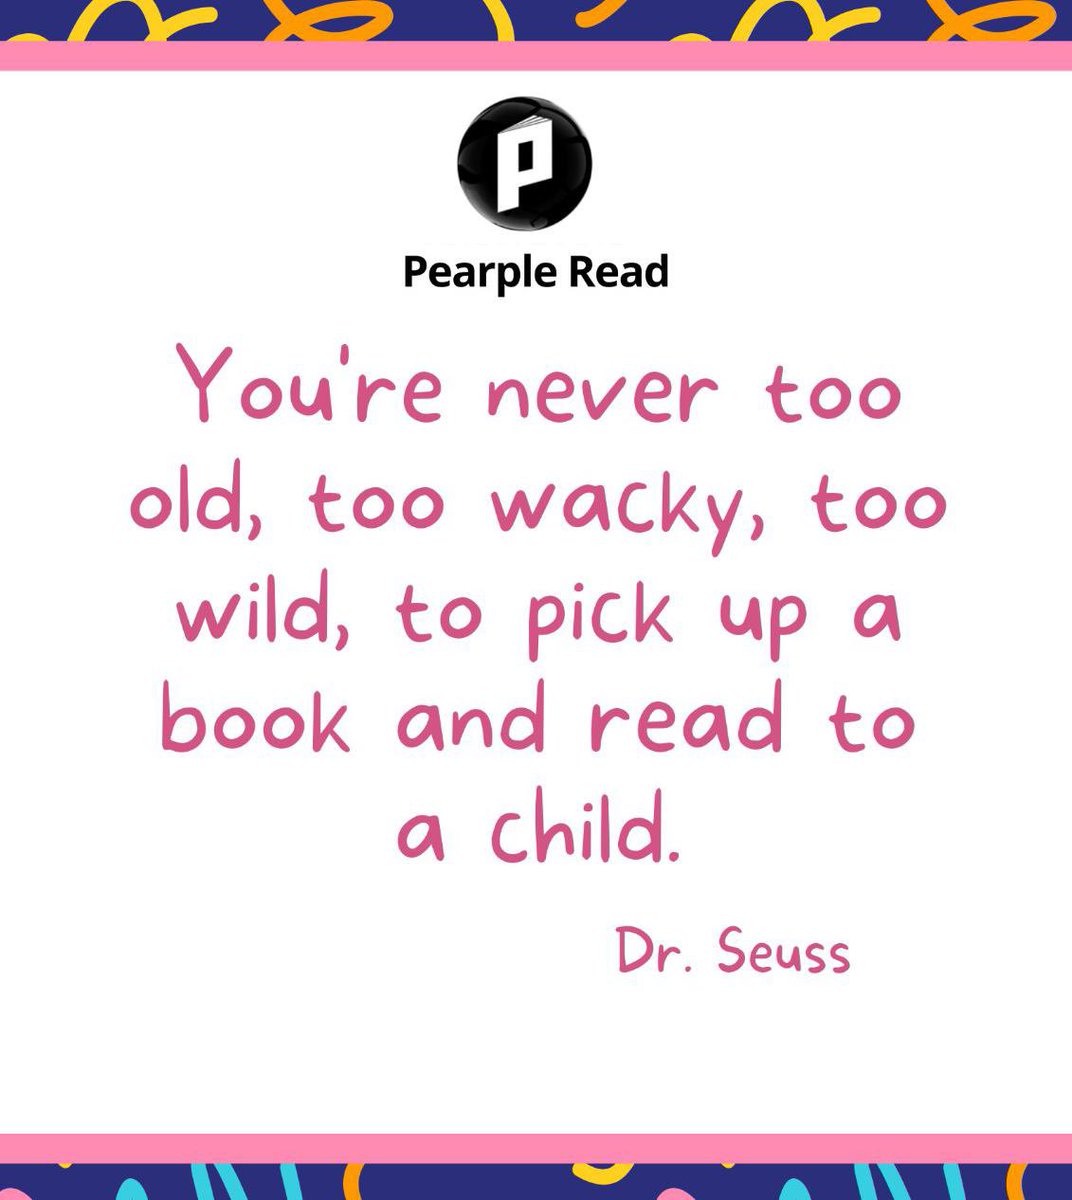 No matter how you are, you can pick a book and read to a child. Children learn a lot from what they see others do around them. 

#readingmotivation #childreaders #read #literacyiskey #readersareleaders #earlyliteracy #loveofreading